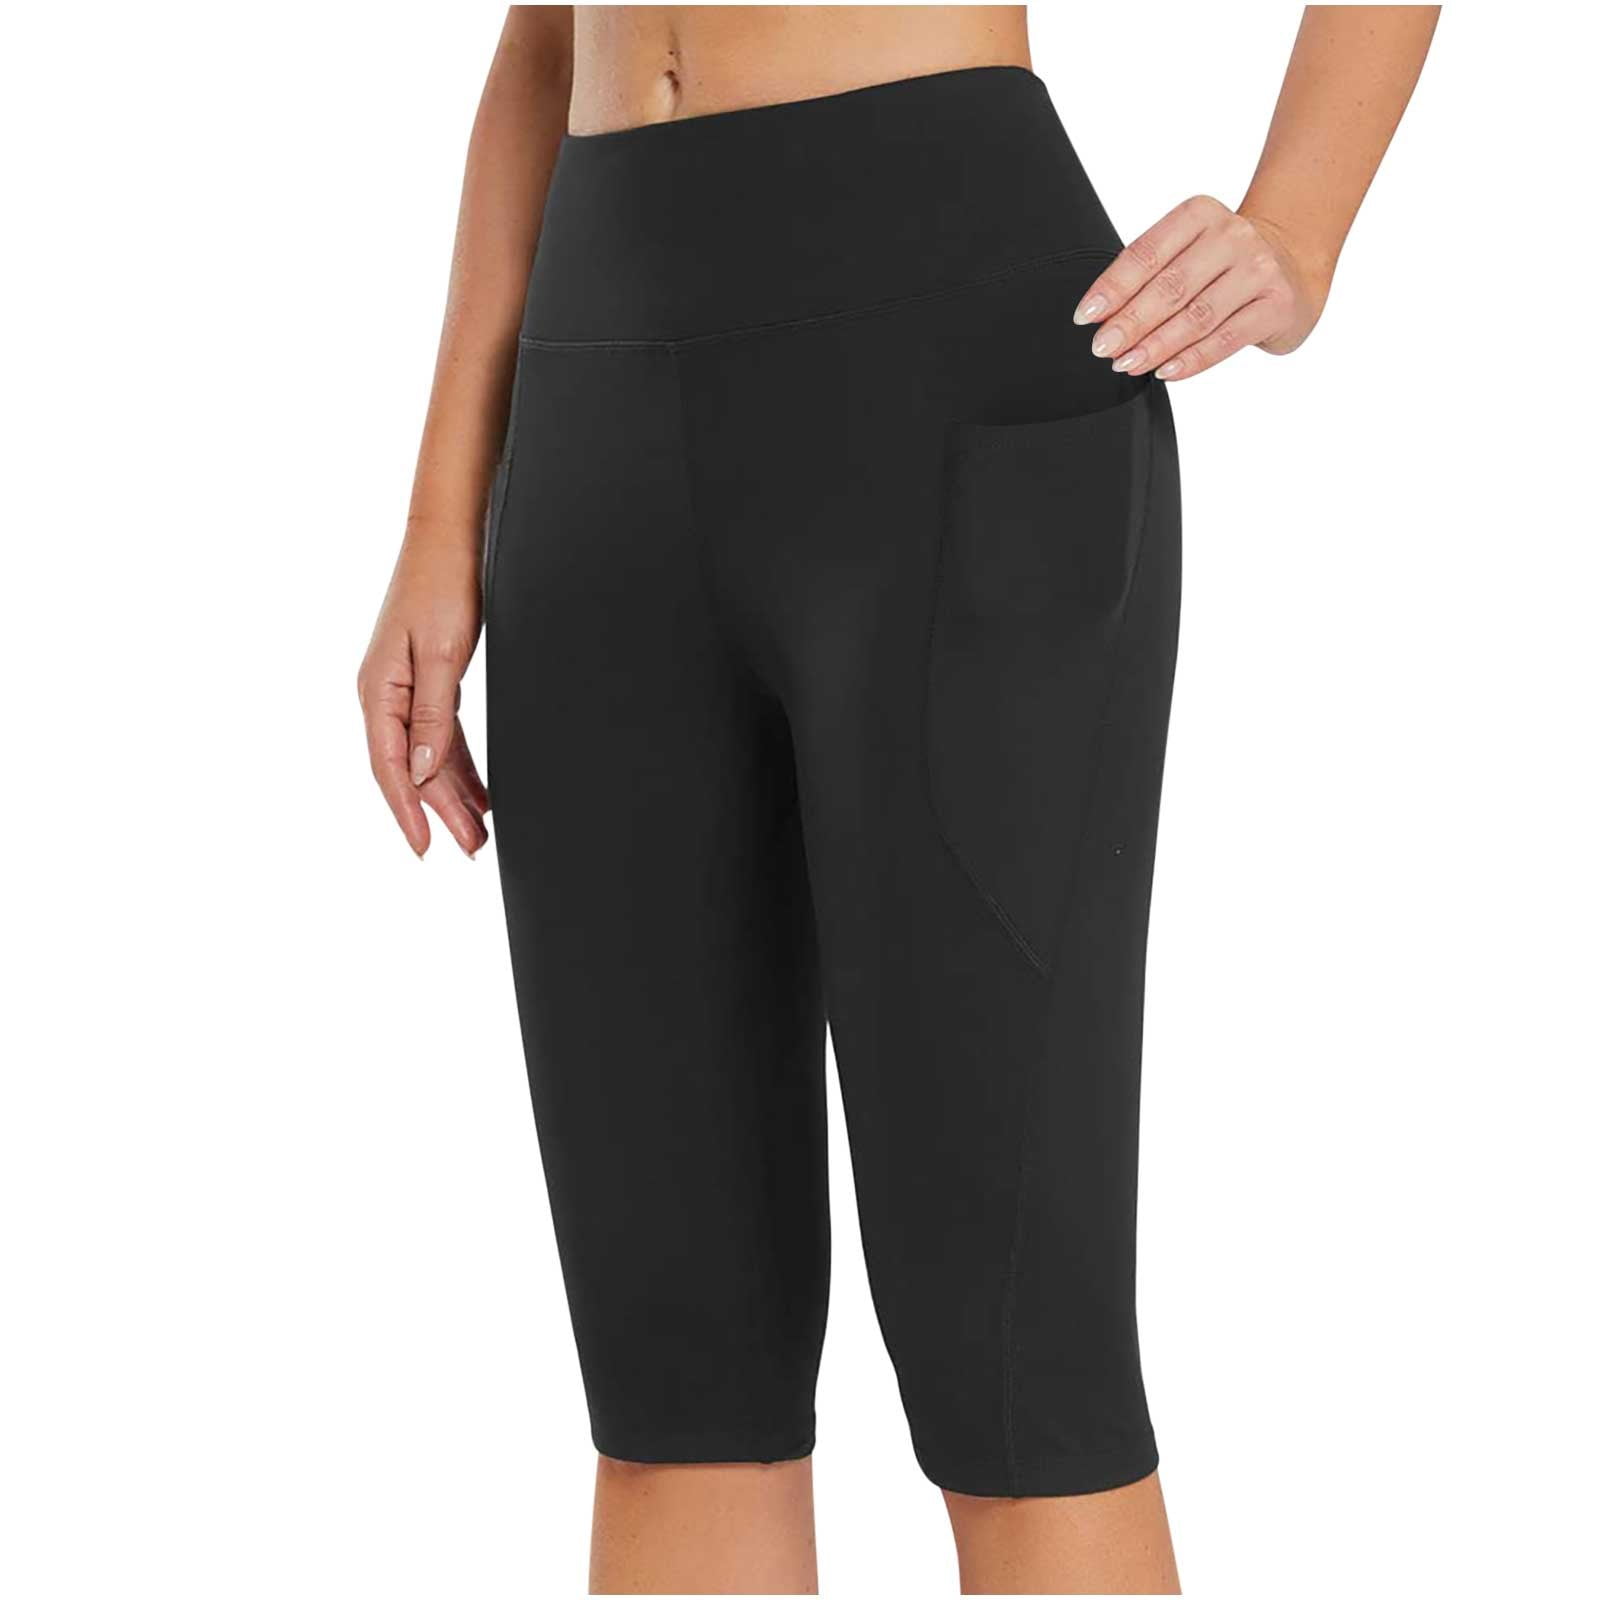 QUYUON Women Running Capris with Pockets Stretch Yoga Leggings Fitness  Running Gym Sports Pockets Active Pants Athletic Works Capris Female Capris